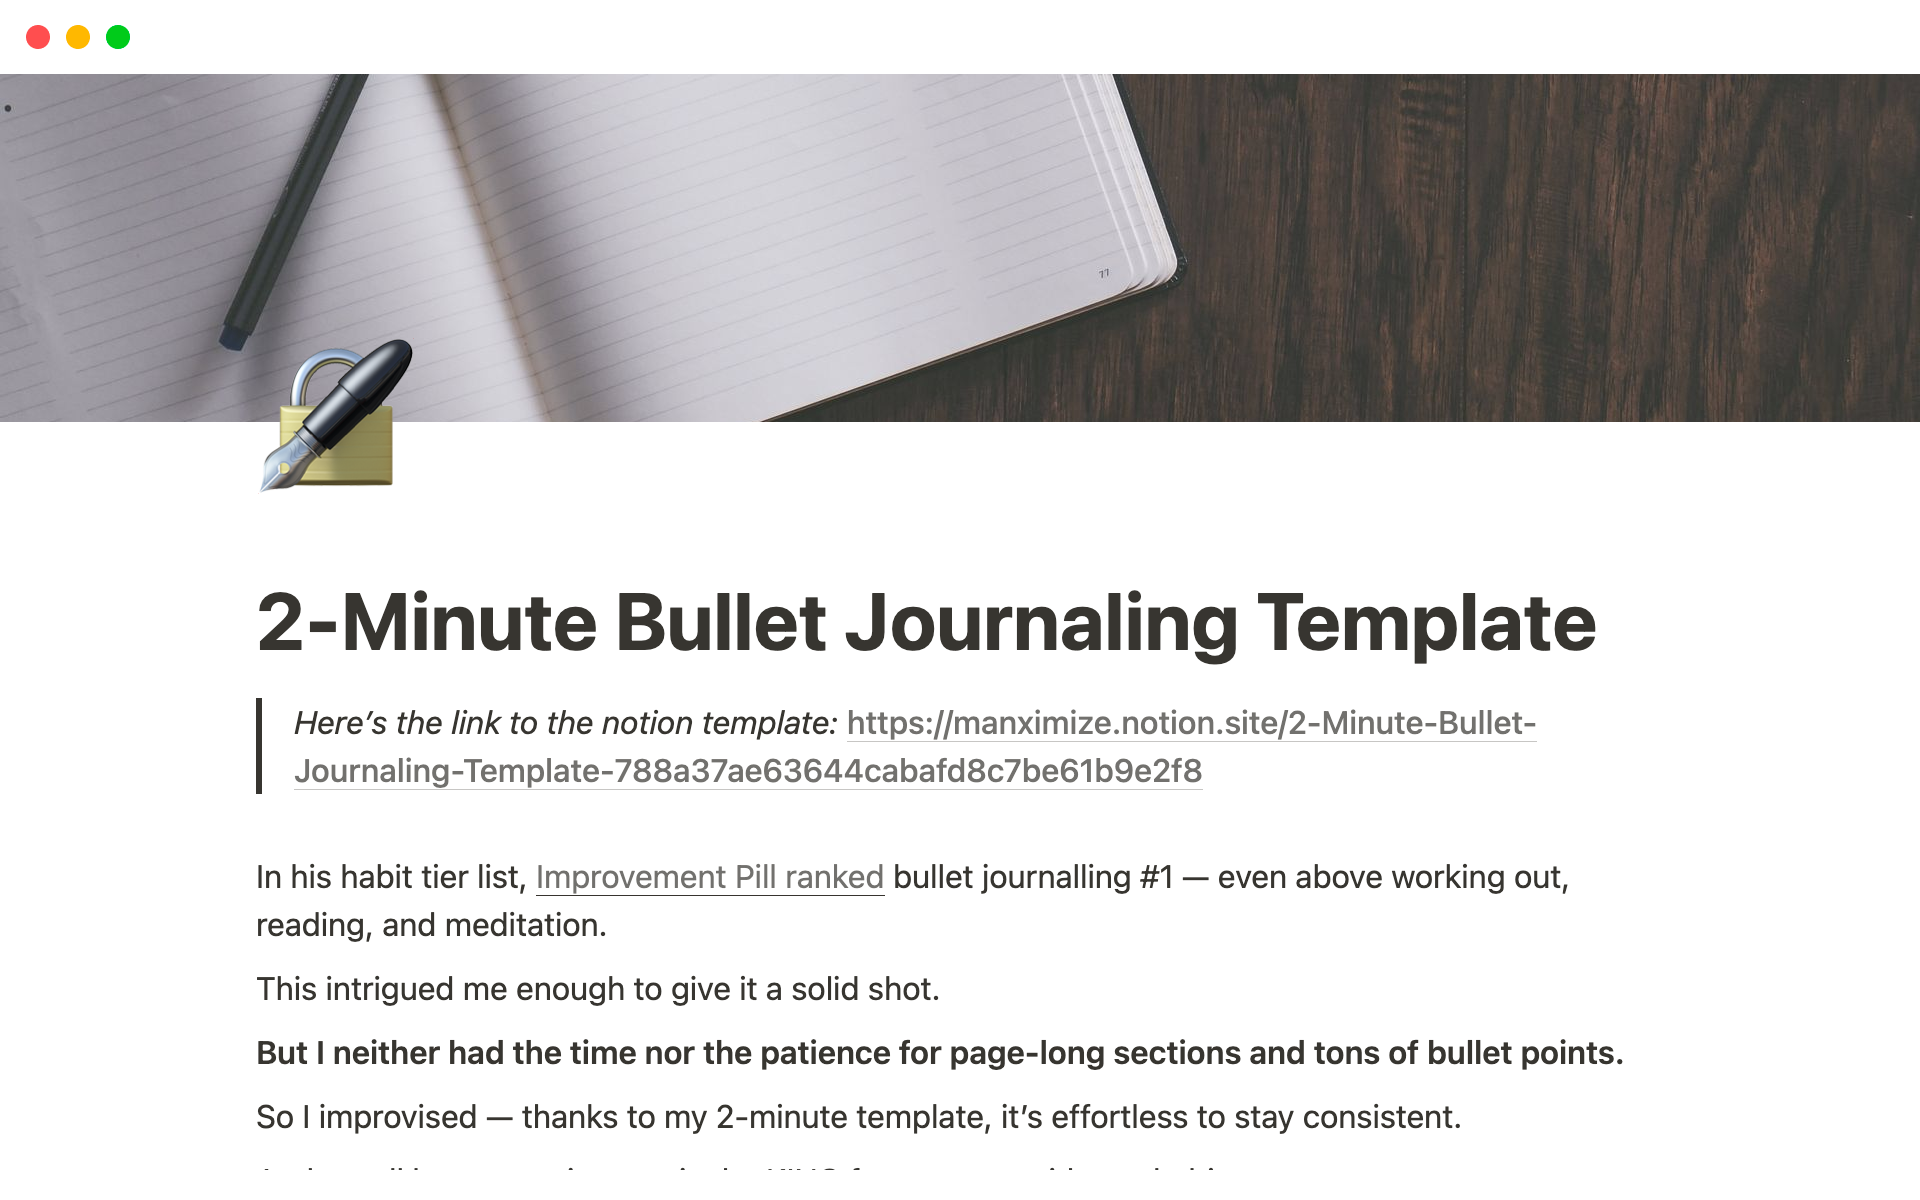 Provides a rapid (2-minute) and efficient way to bullet journal for peak productivity and clarity (It's been SO loved that it has 4000+ downloads and even earned $700+ despite being free)